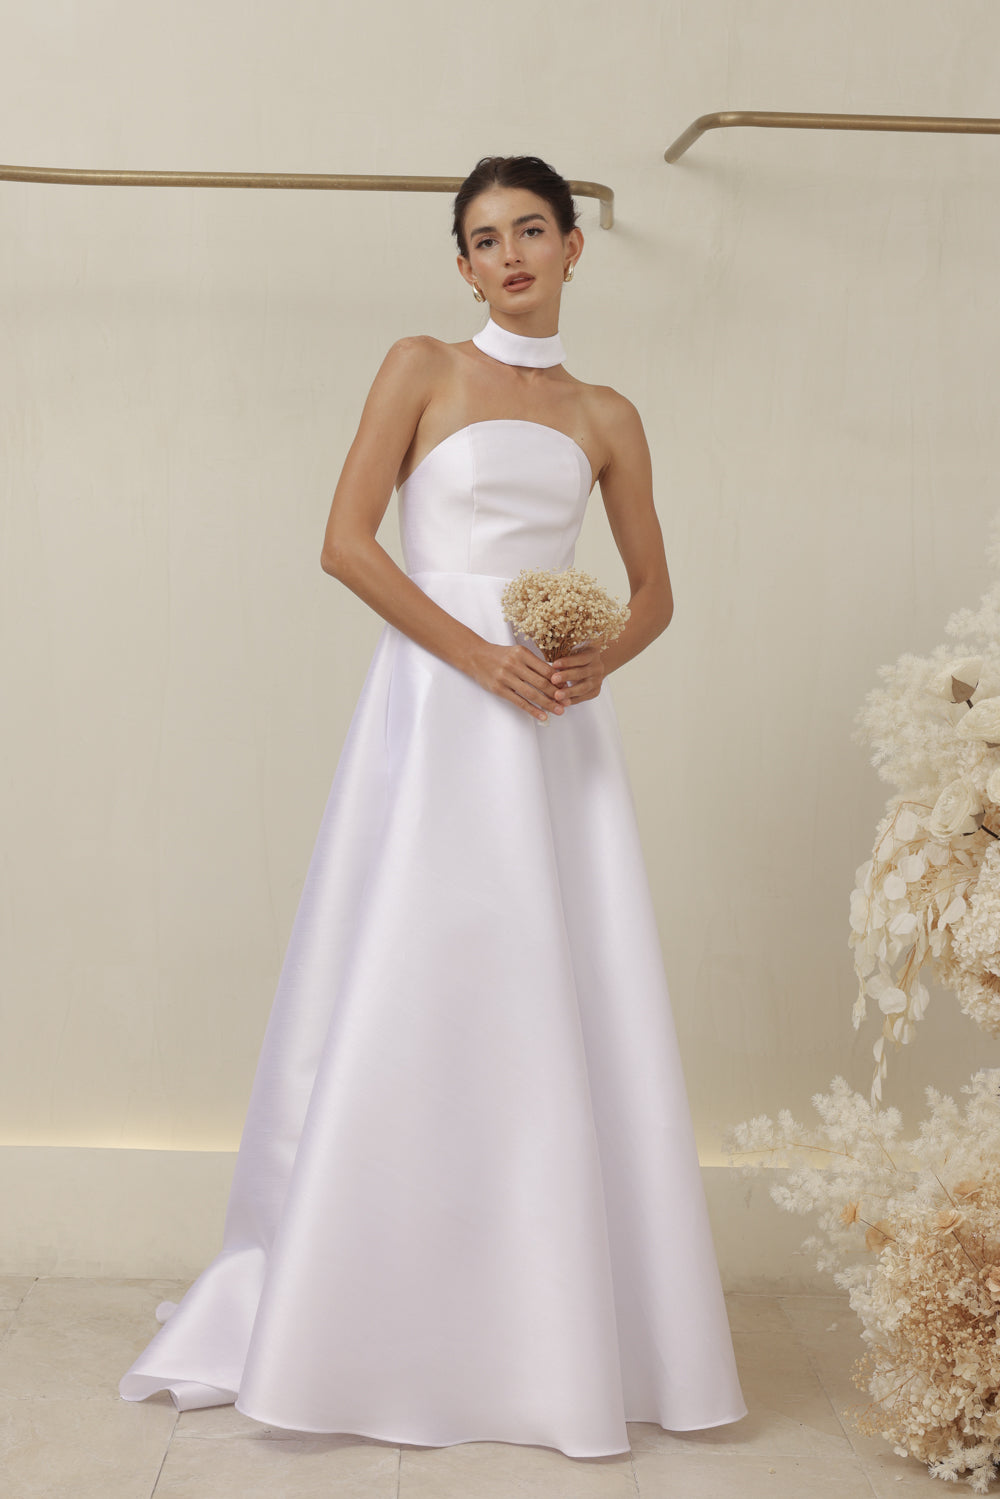 ALLURA DRESS Curved Neckline Long Gown with Trail and Covered Buttons (White Gazaar)